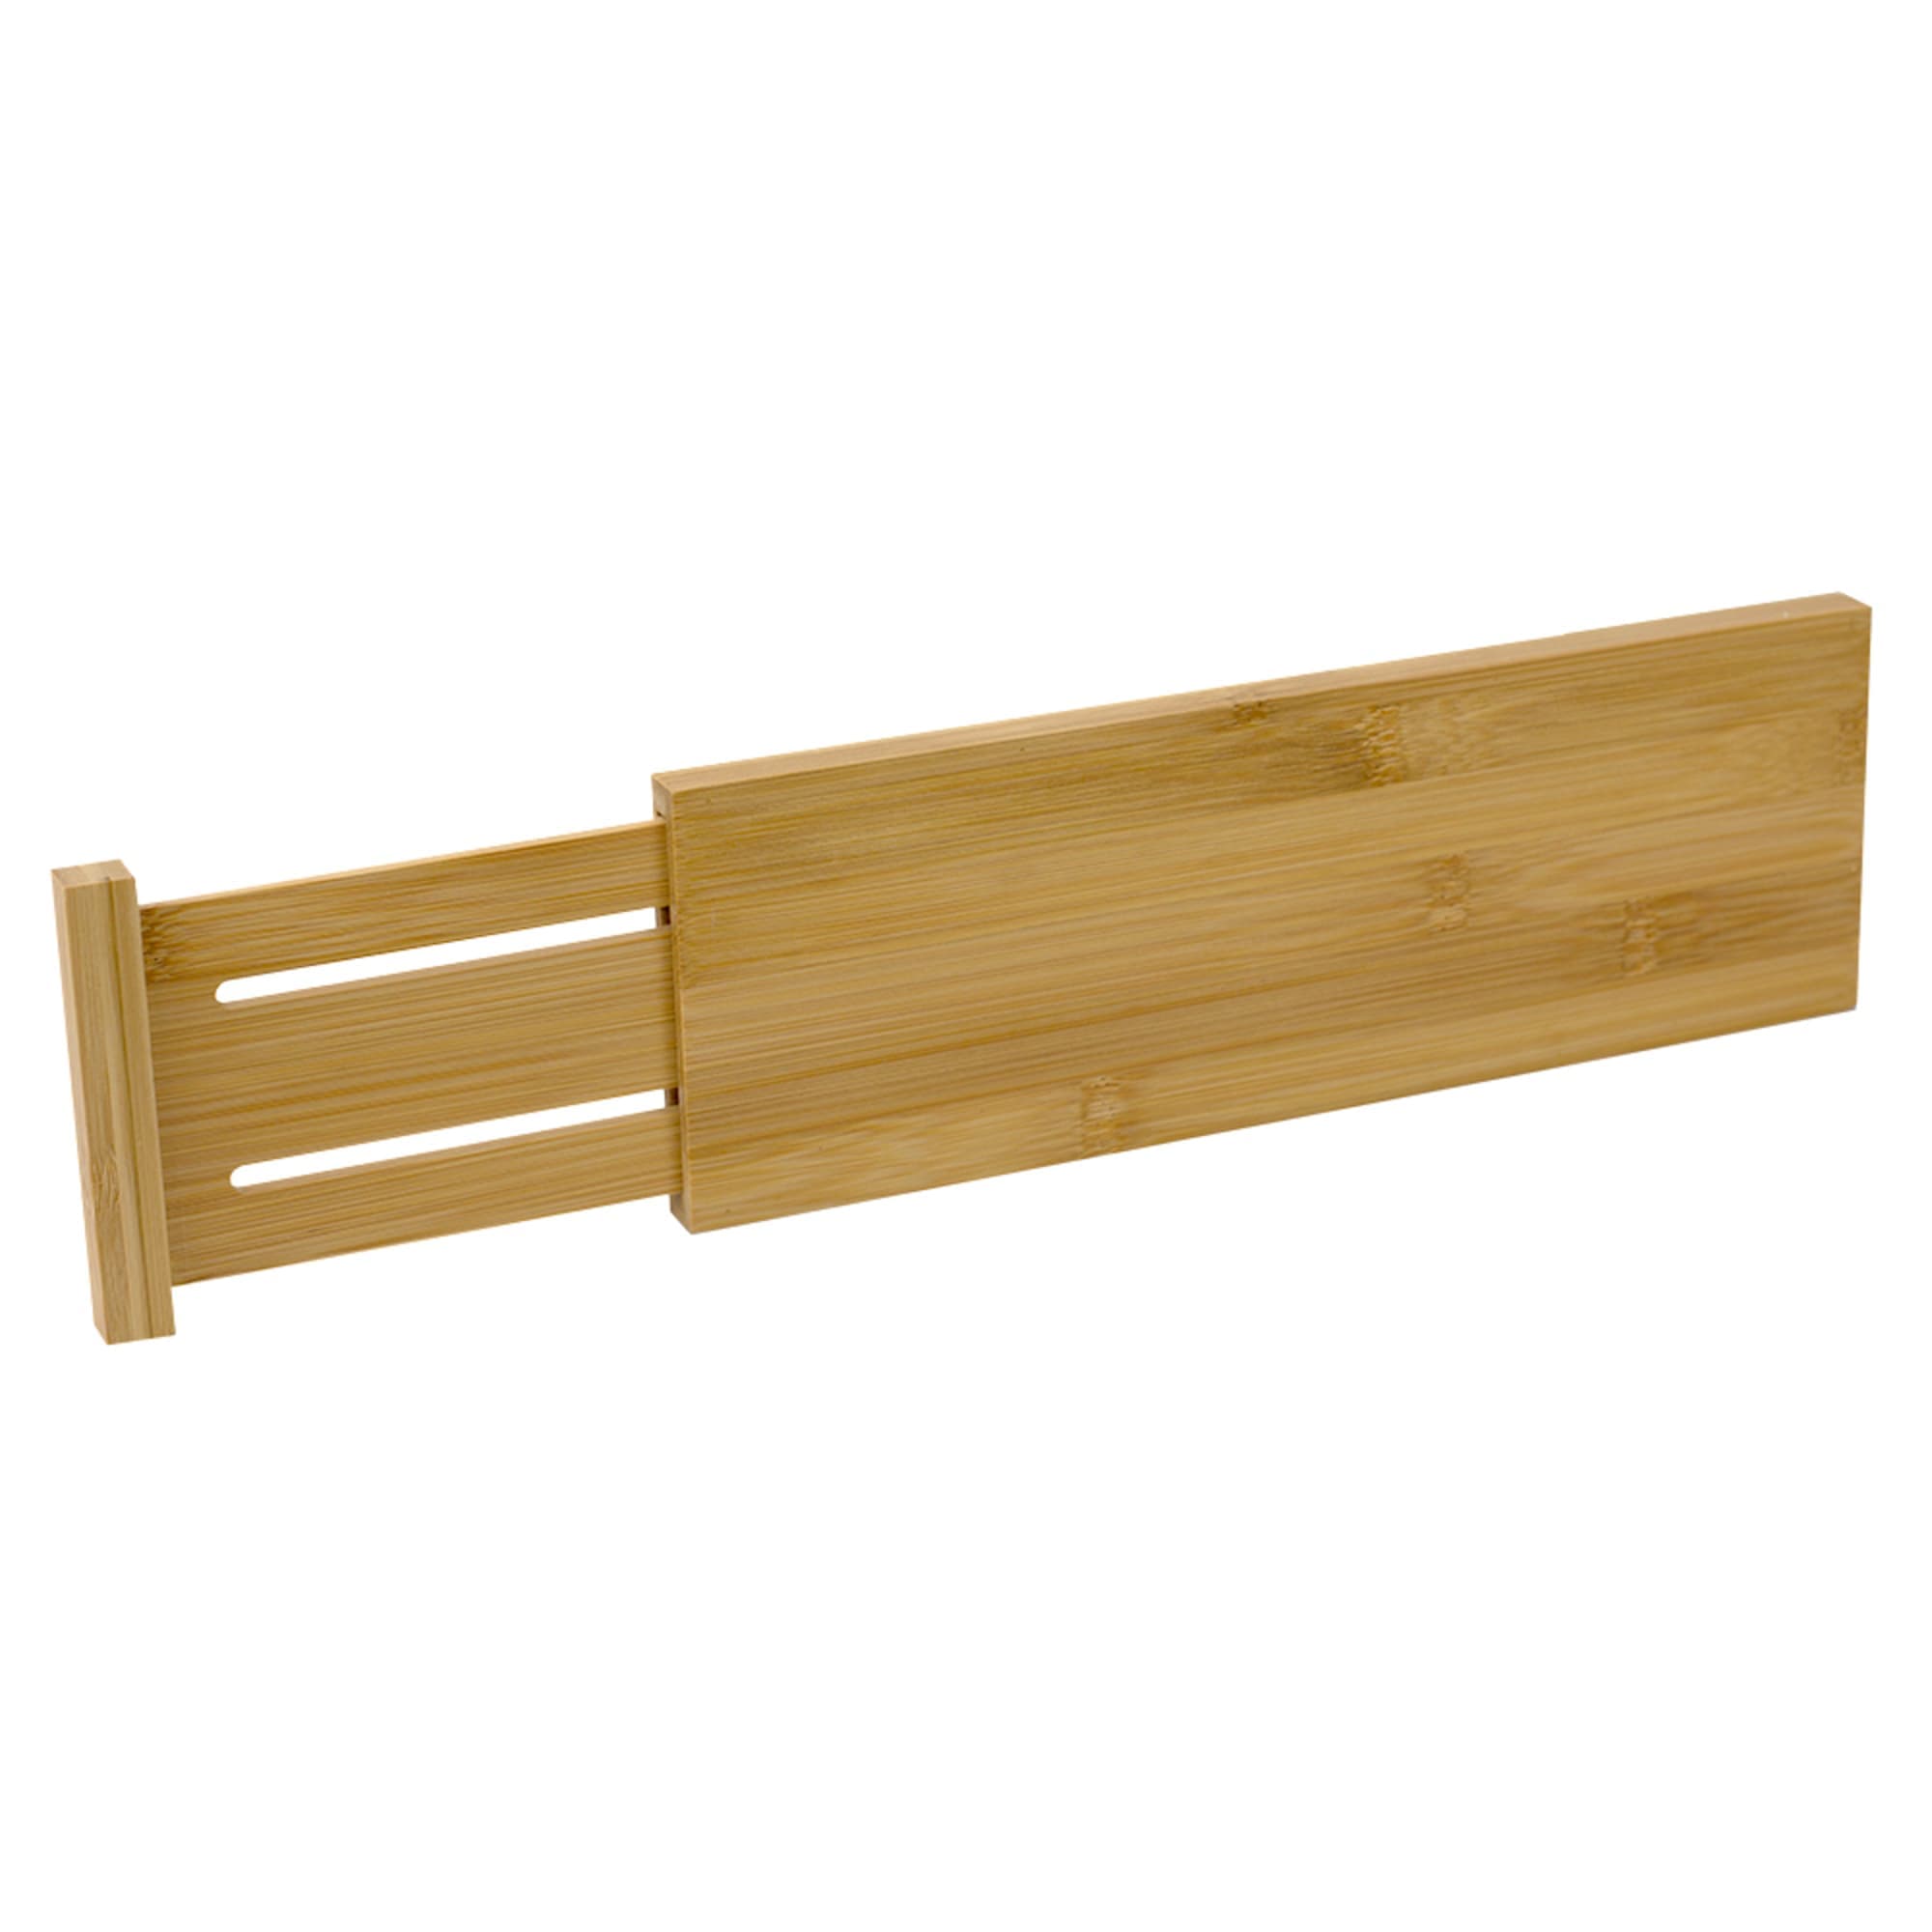 Home Basics   12.5" x 4"  Bamboo Drawer Partition, Natural $4.00 EACH, CASE PACK OF 12